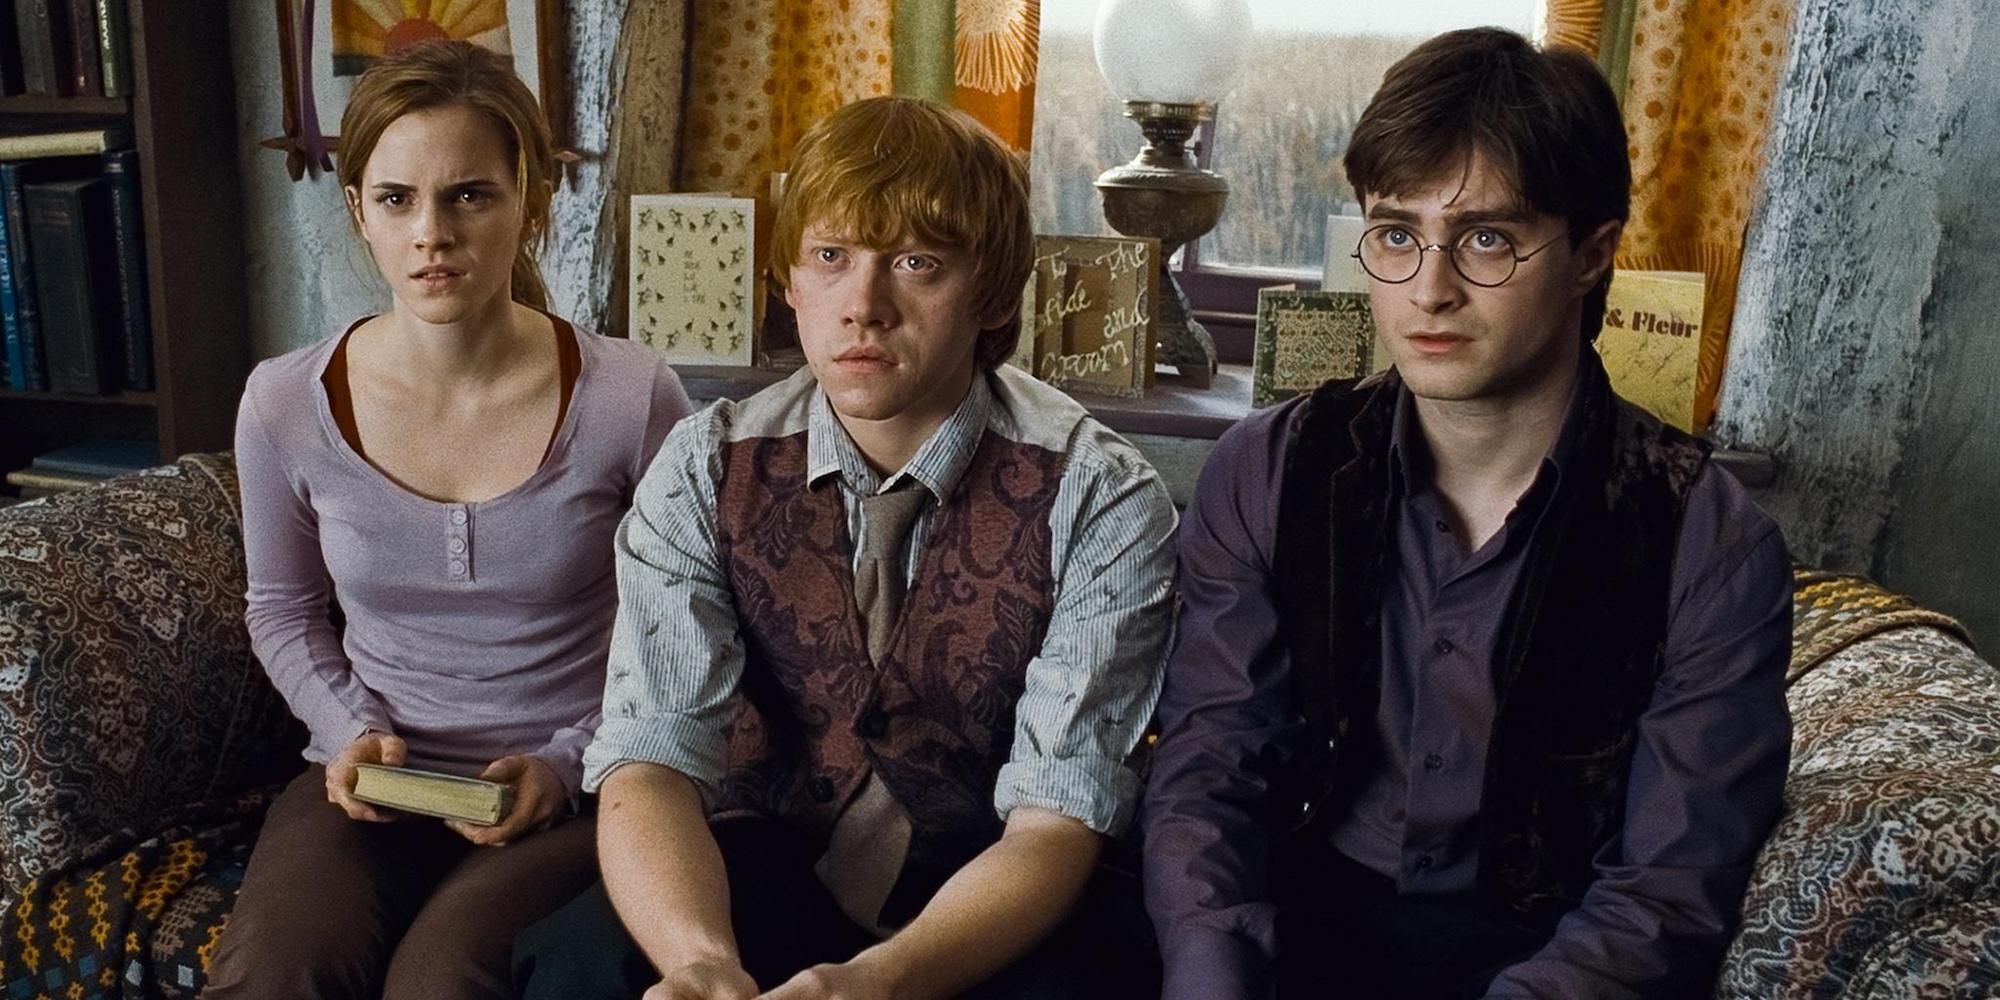 Harry, Ron and Hermione sitting together and looking confused in Harry Potter and the Deathly Hallows Part 1.